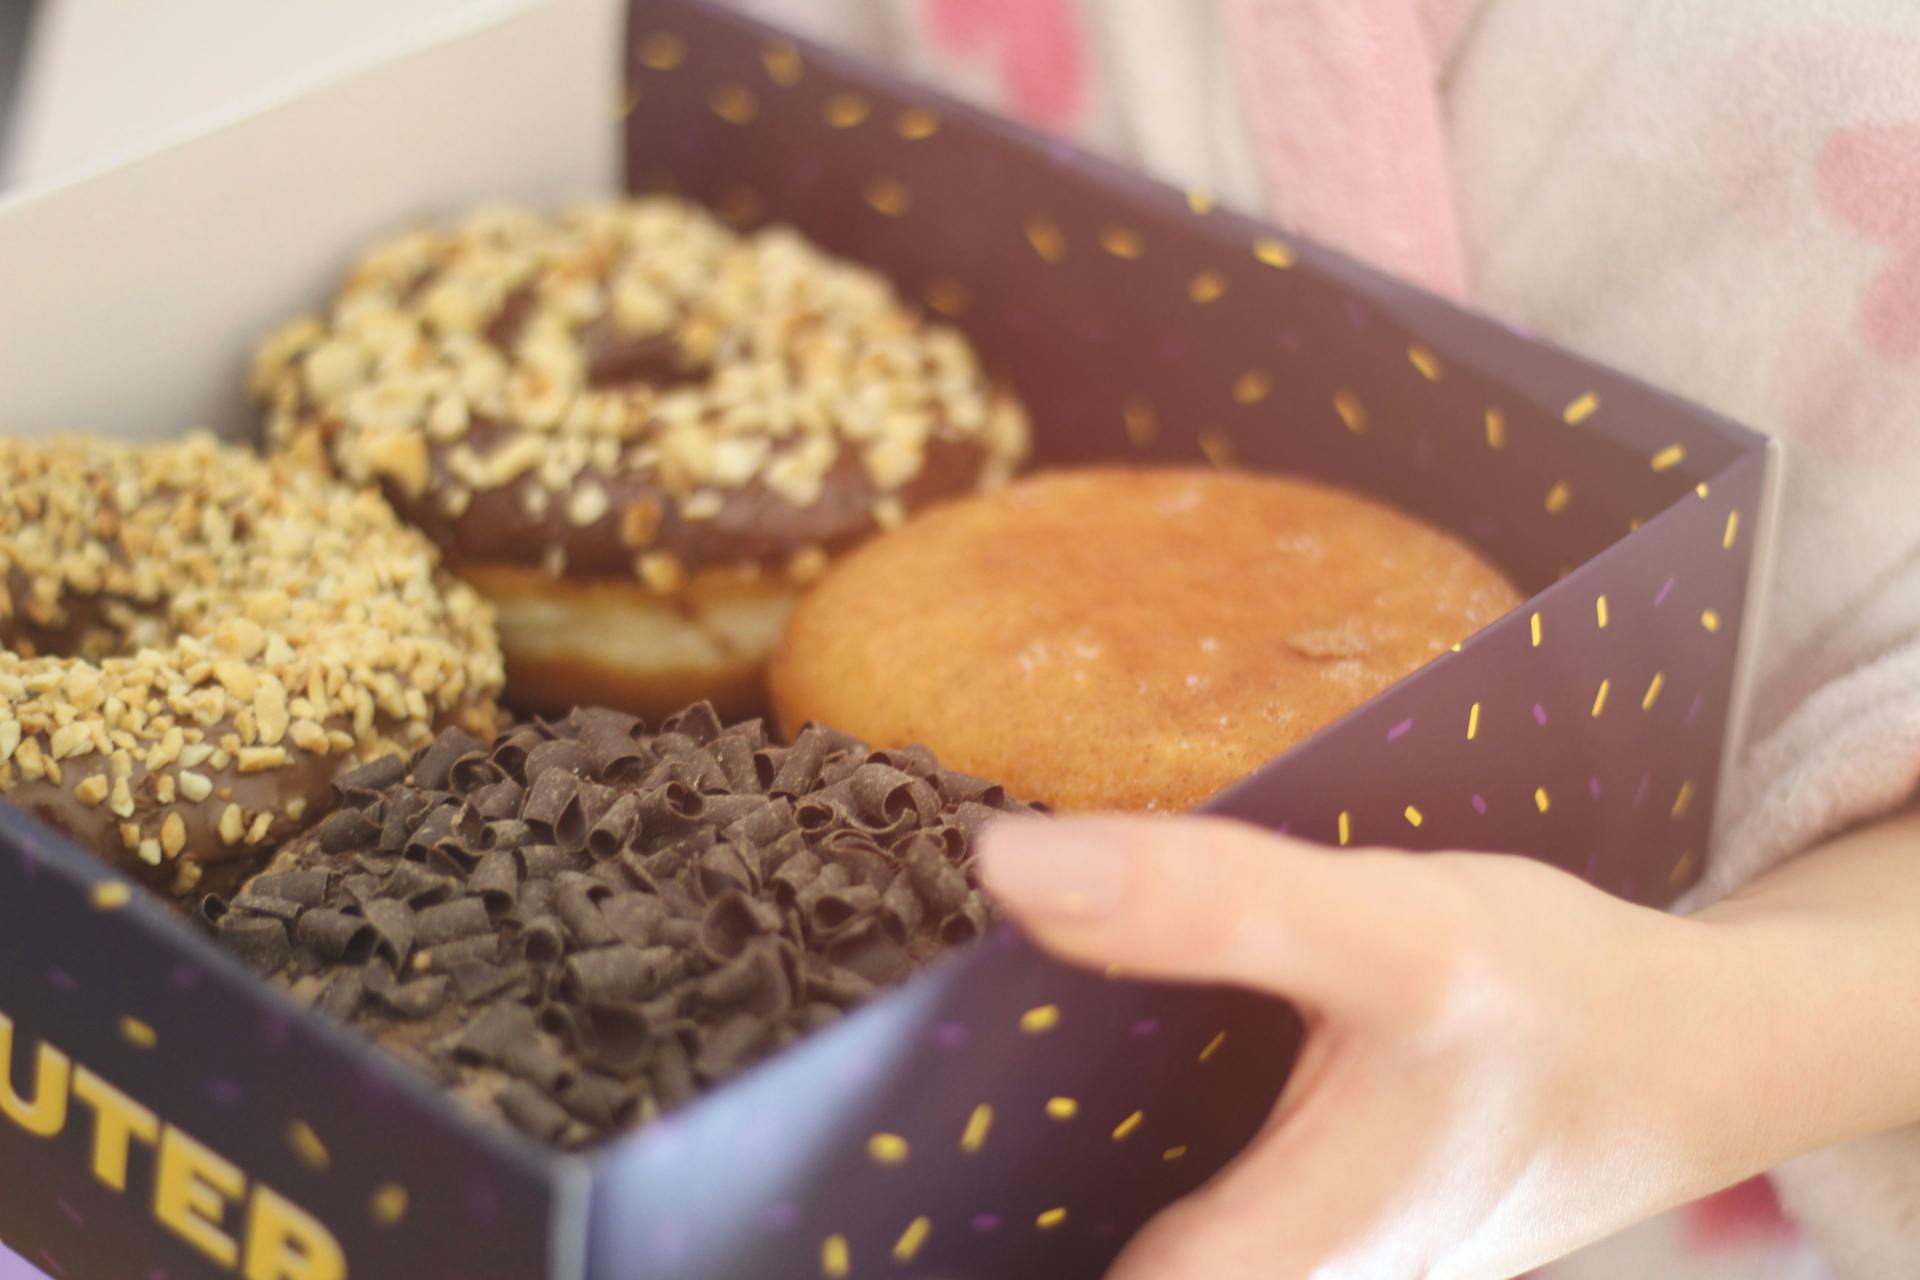 A woman holding a box of donuts | Source: Pexels